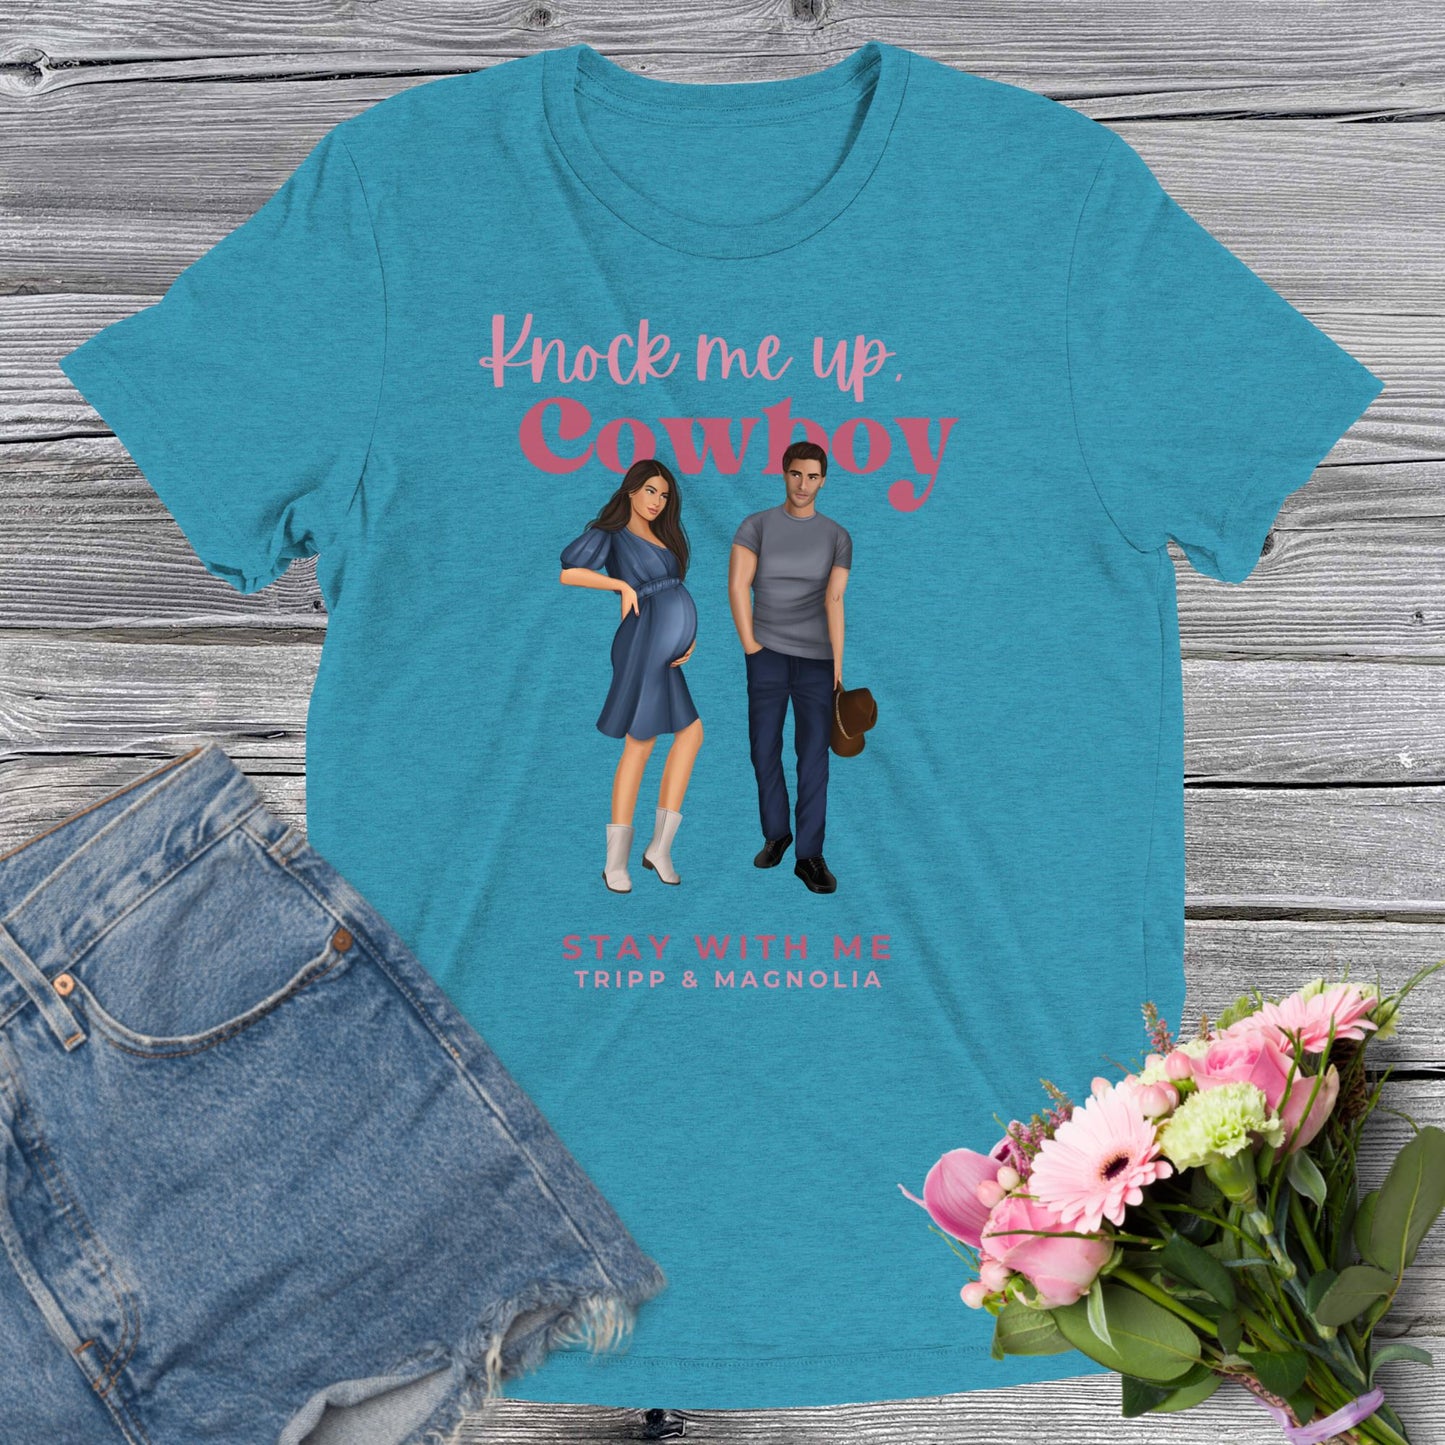 "Knock me up, Cowboy" [Stay With Me] Unisex Triblend Short Sleeve T-shirt